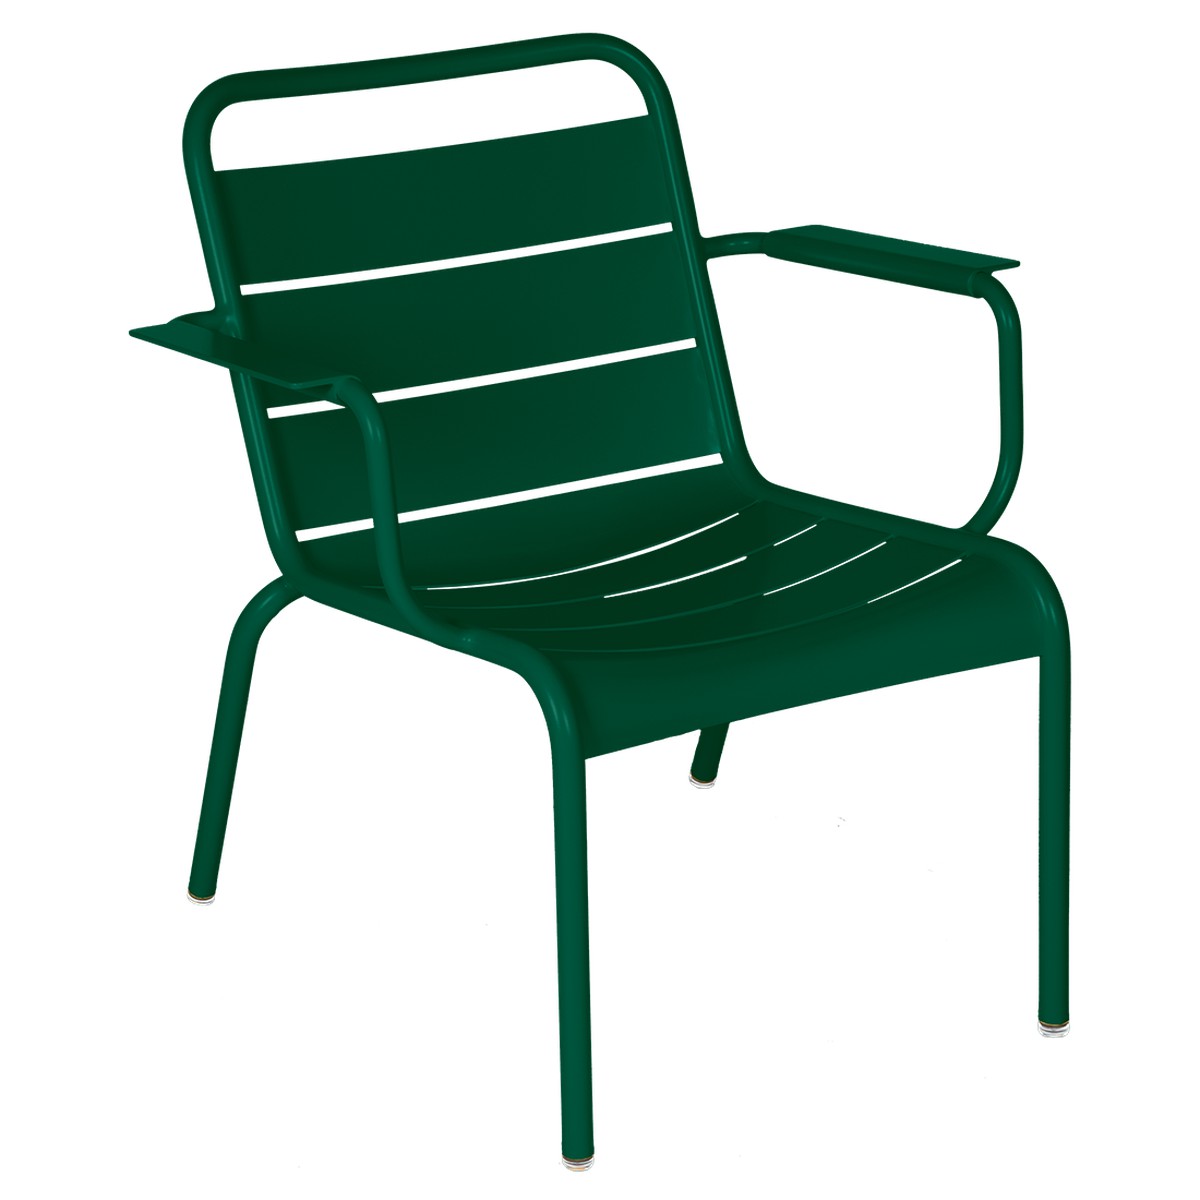 Fermob Luxembourg Fauteuil Lounge Luxembourg Vert sapin L 72.8 x l 71 x H73.9cm